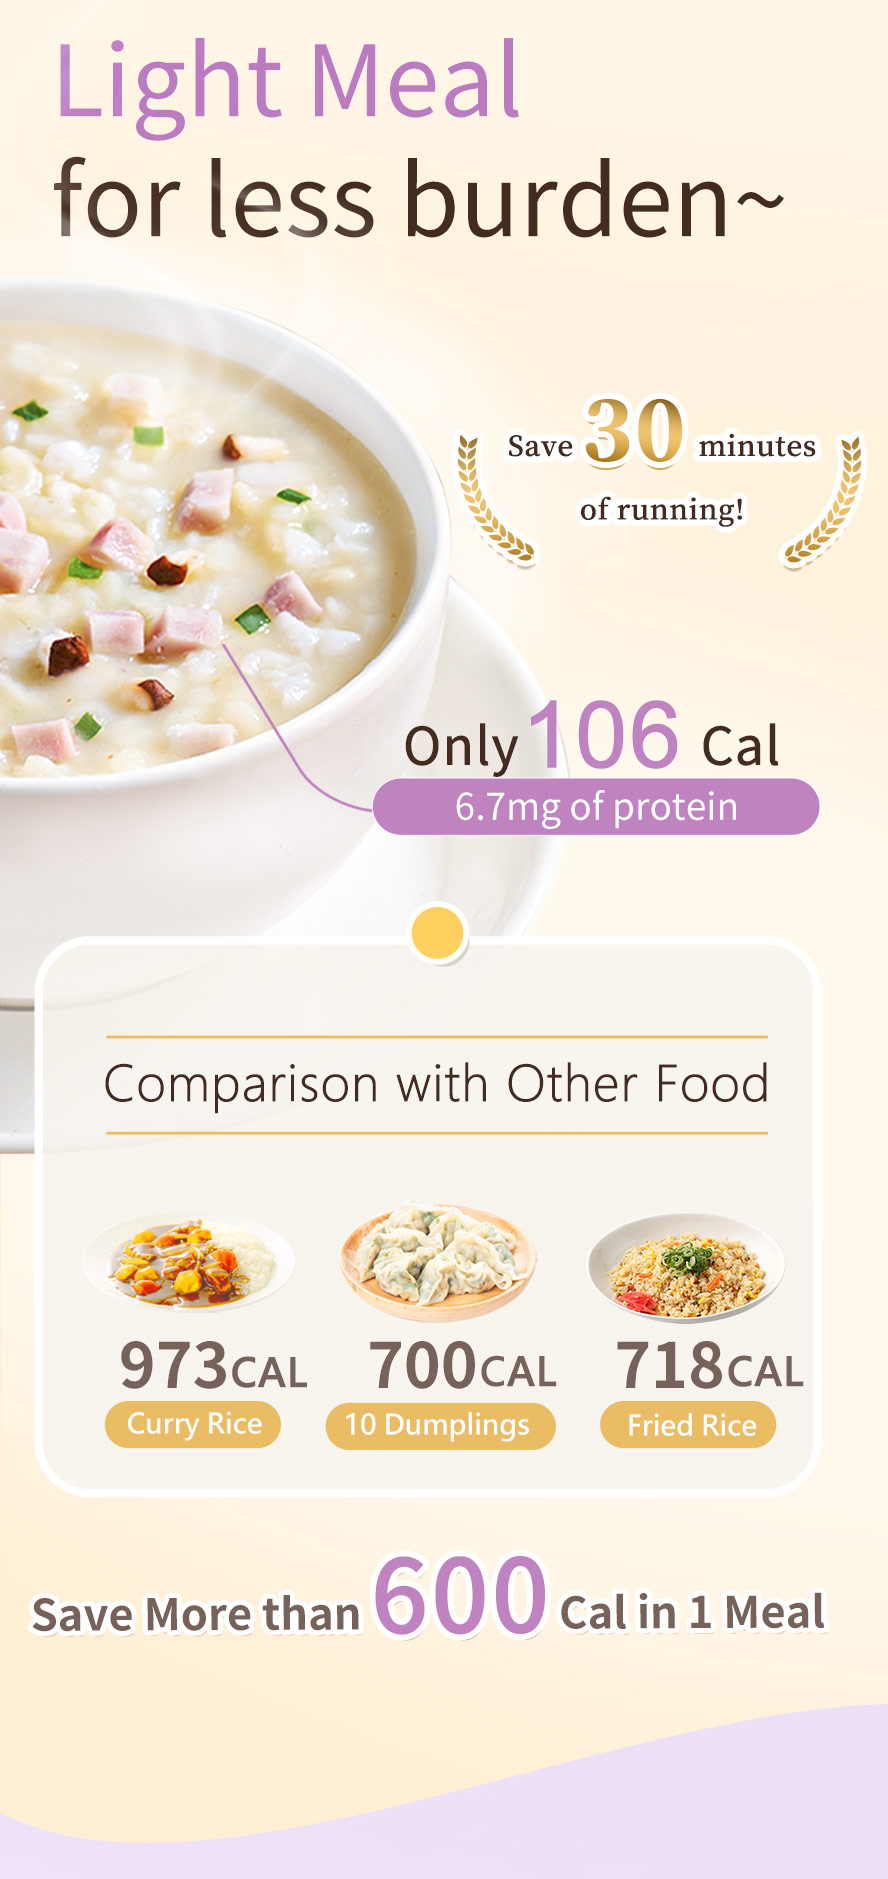 SiimHeart Instant Mushroom & Taro Congee has is a light meal which has only 106 low calories